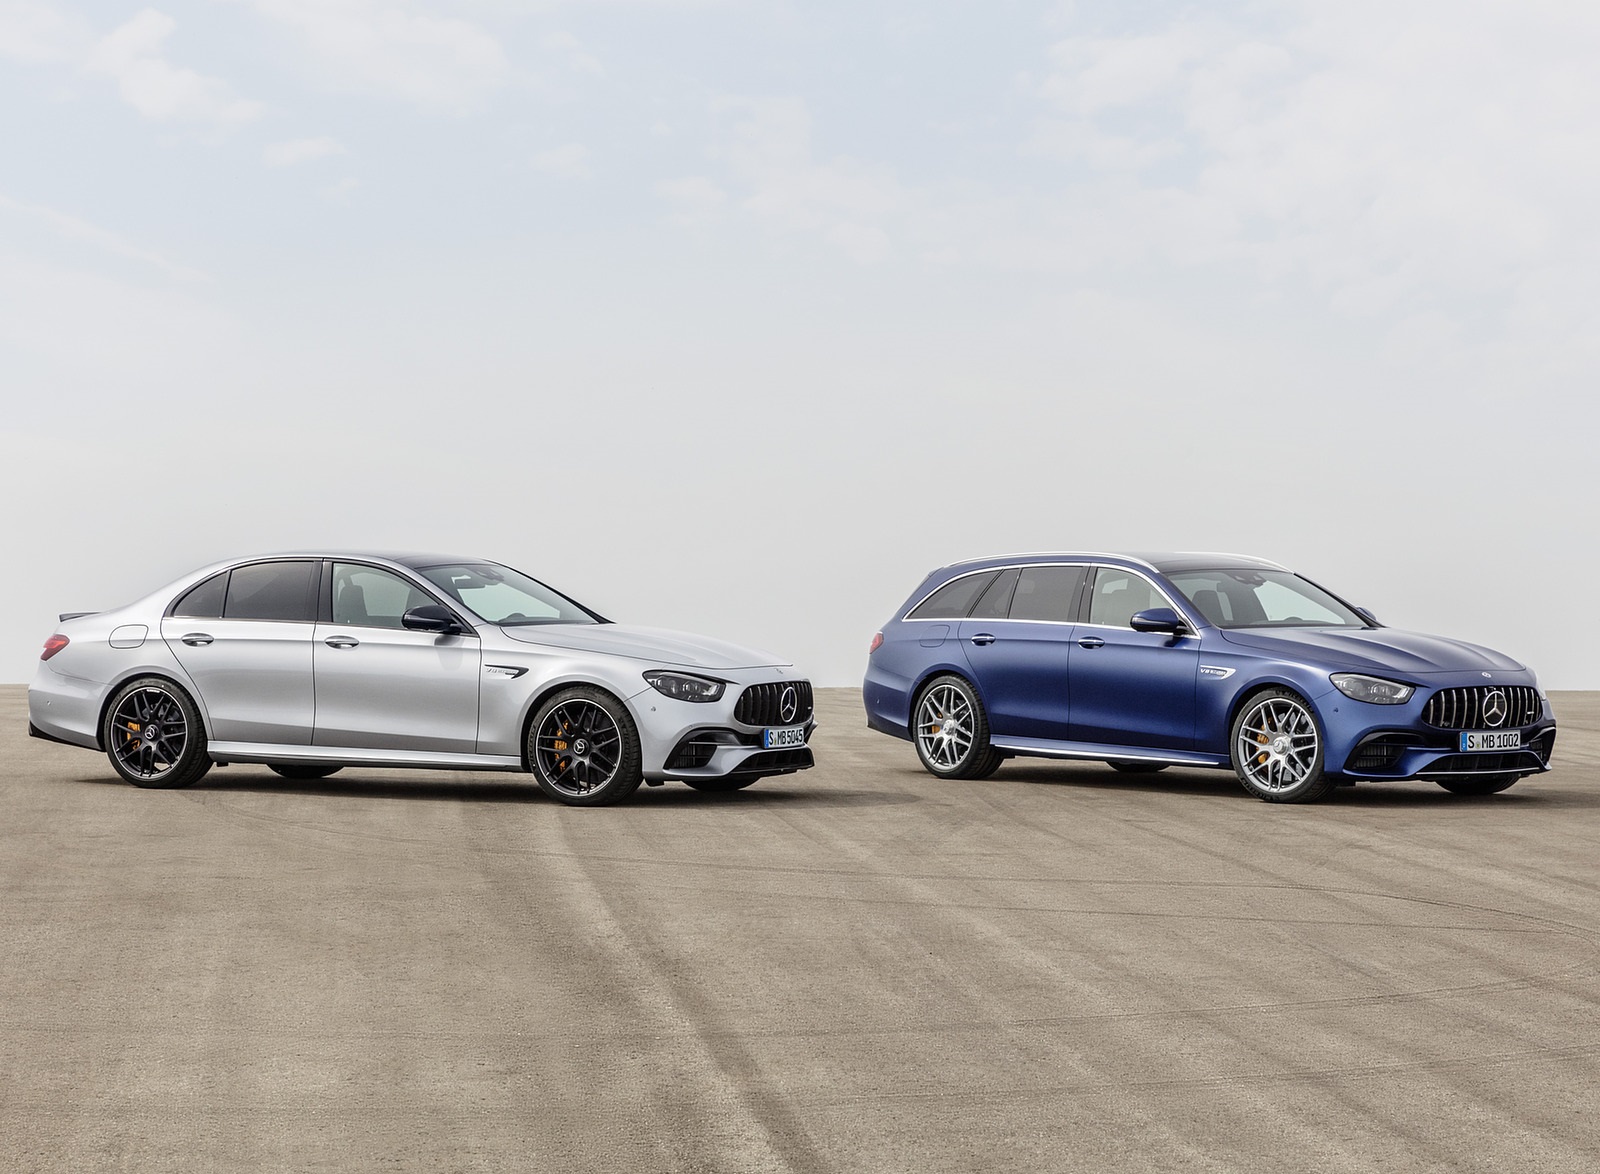 2021 Mercedes-AMG E 63 S Sedan and Estate Wallpapers #85 of 96